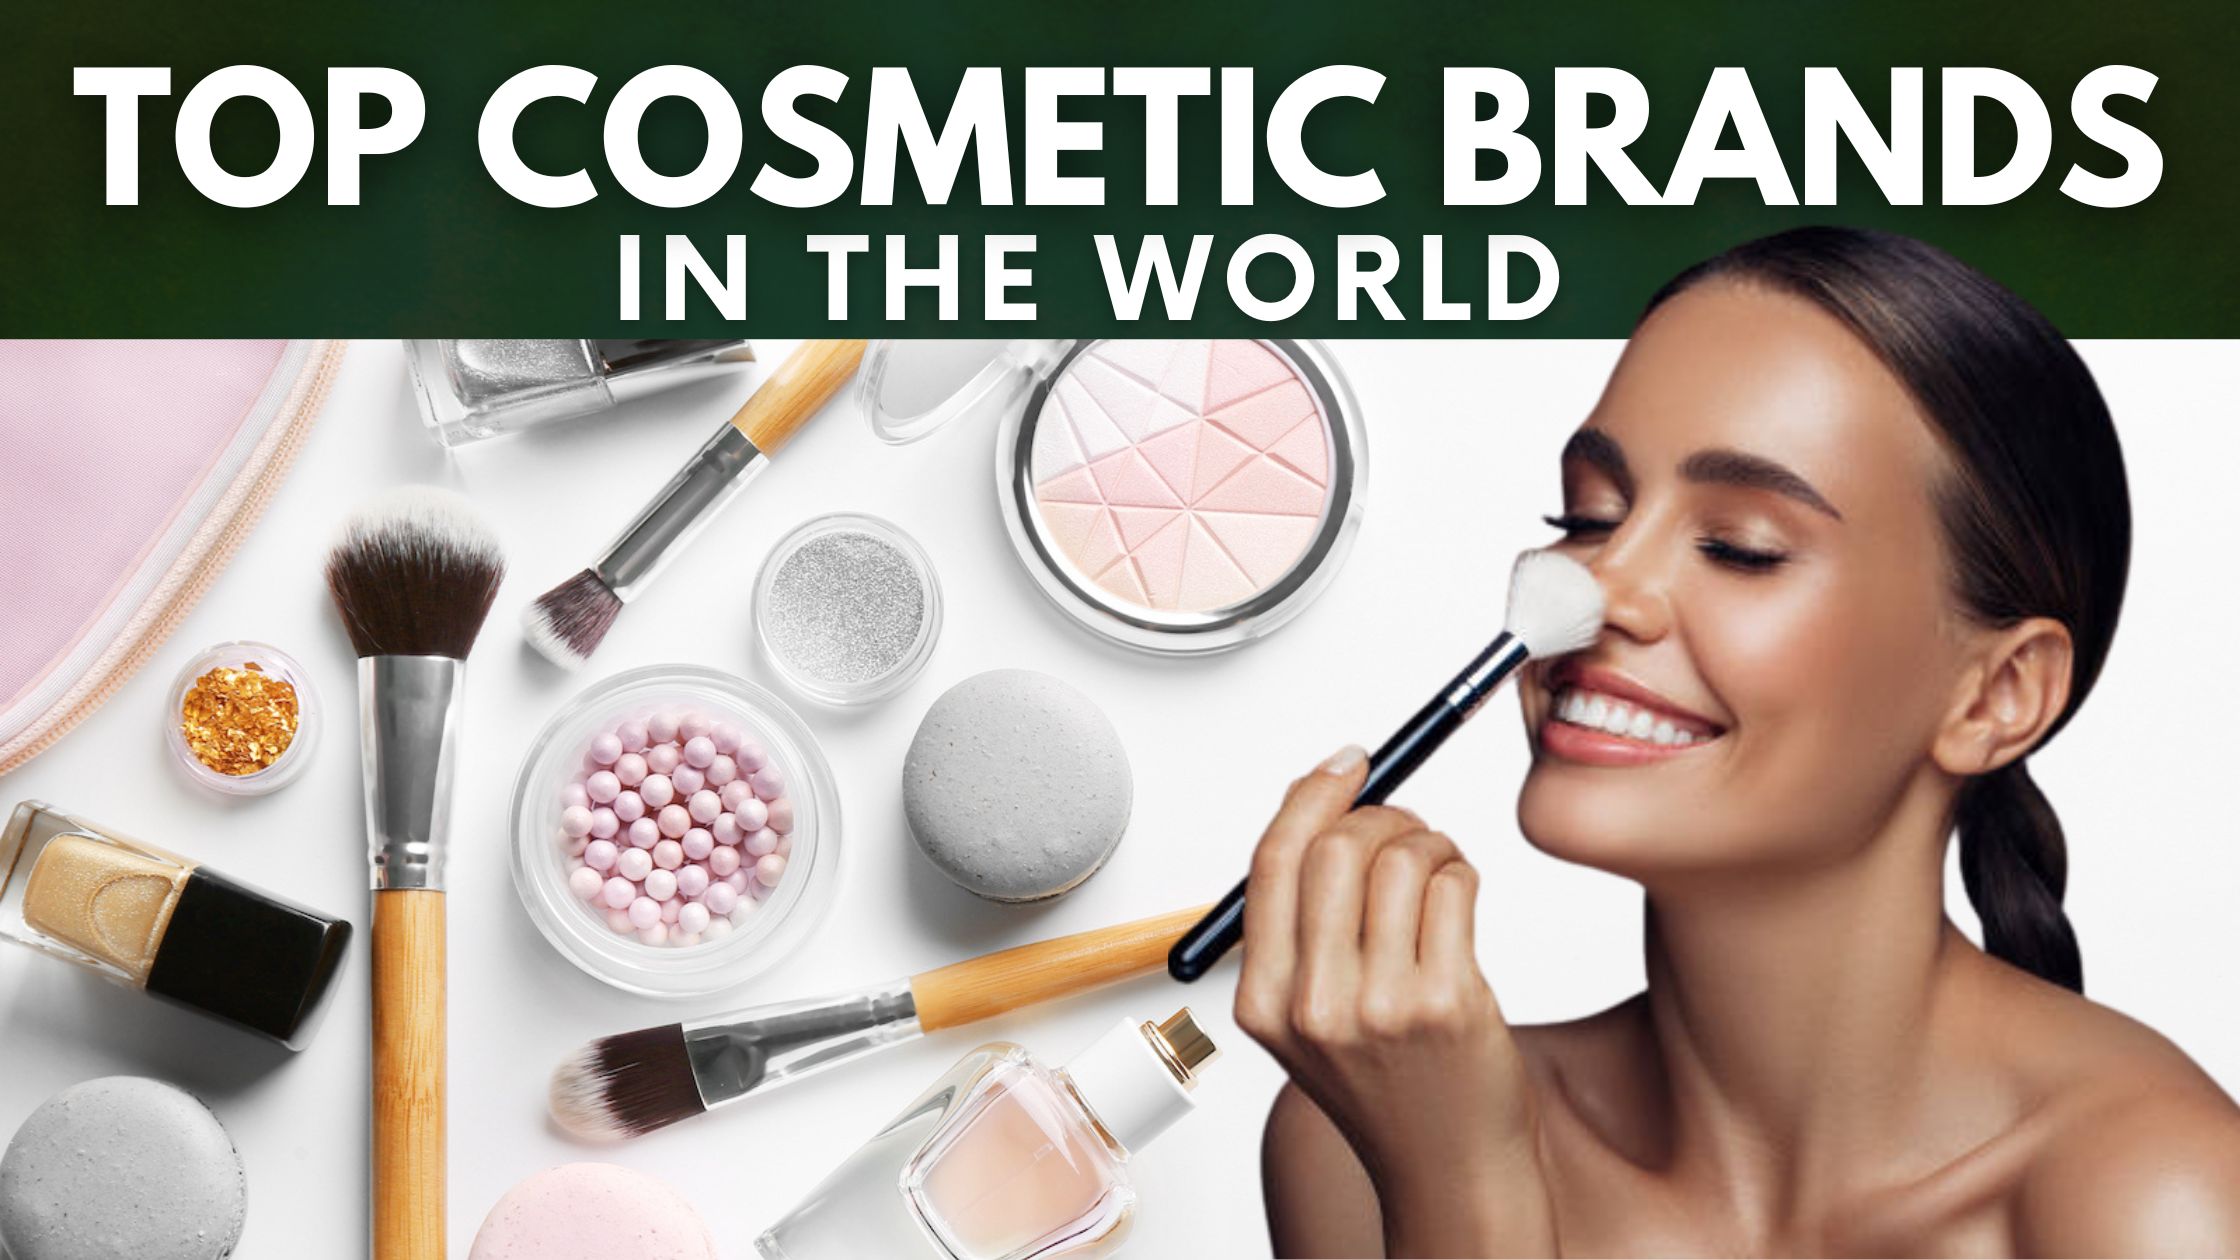 Top 10 Makeup Brands in the World - Blogs World